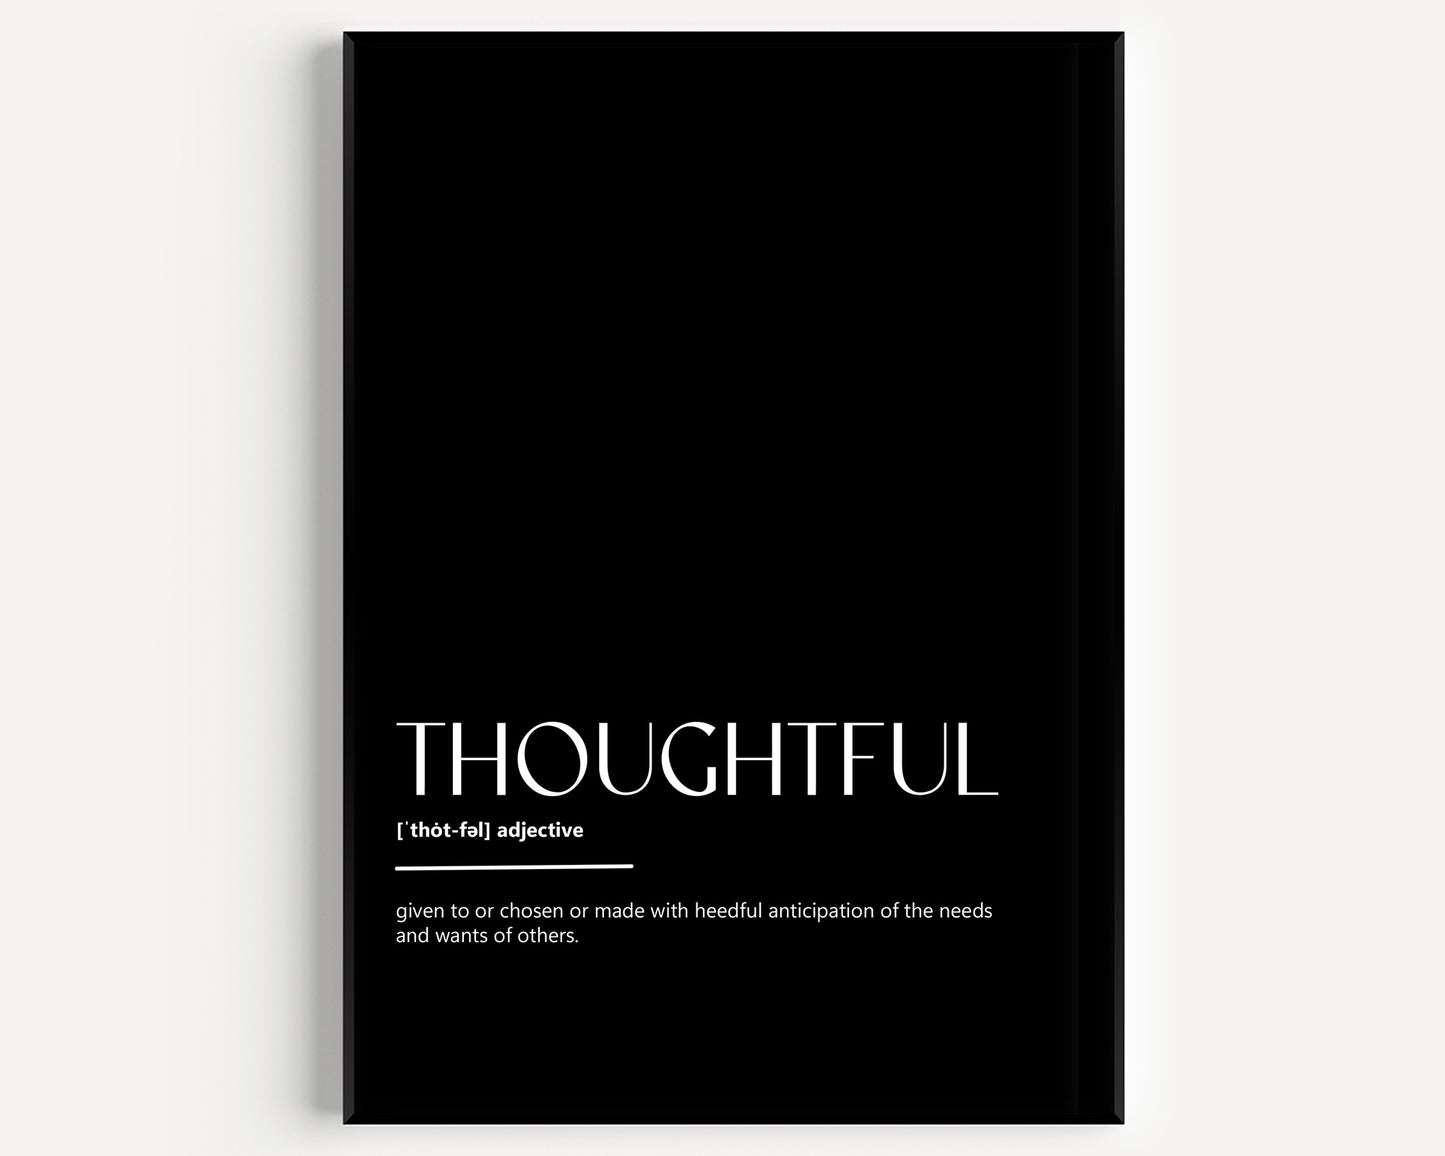 Thoughtful Definition Print - Magic Posters